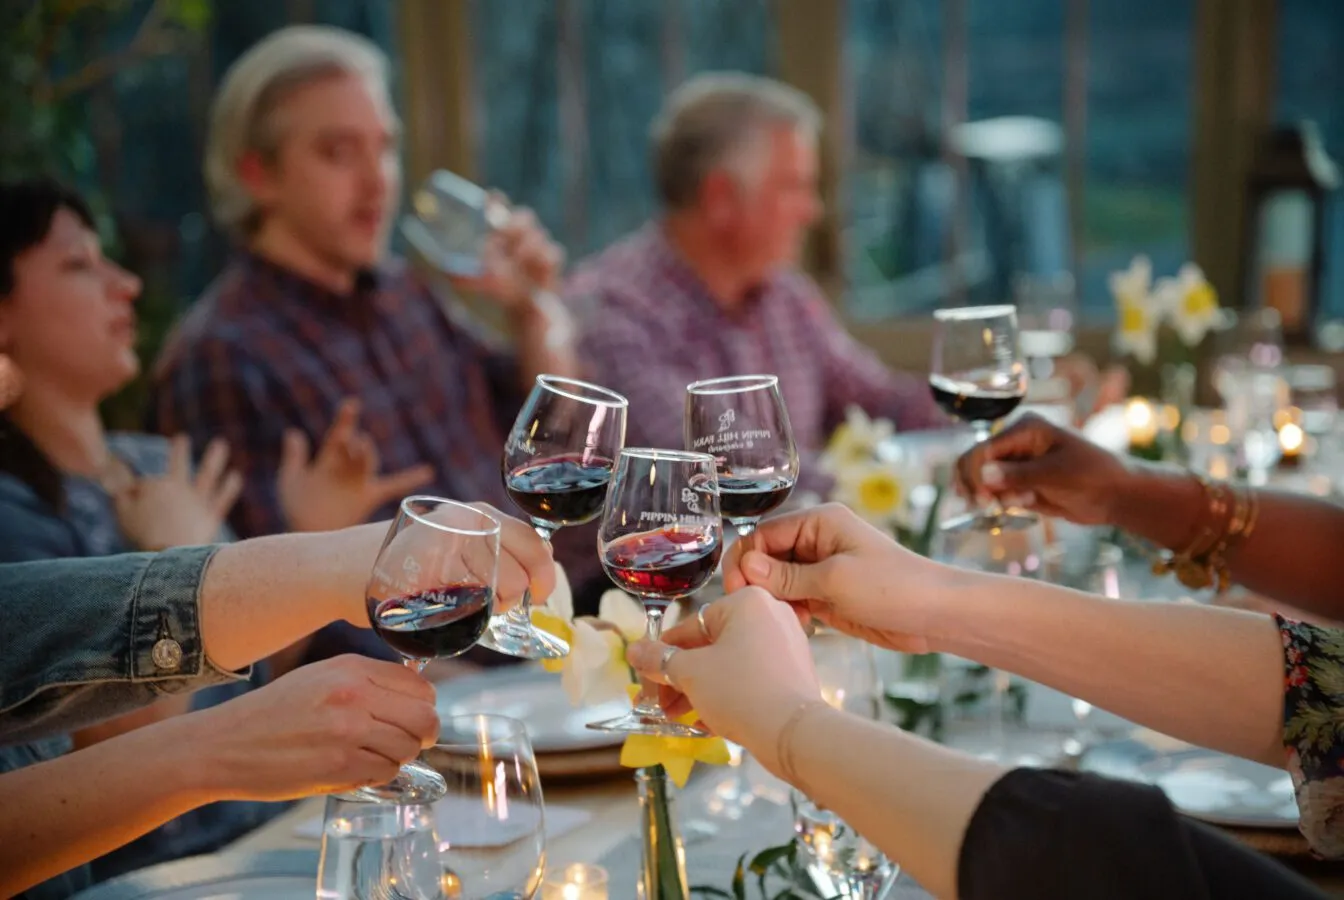 Cheers at a Vintner's Table